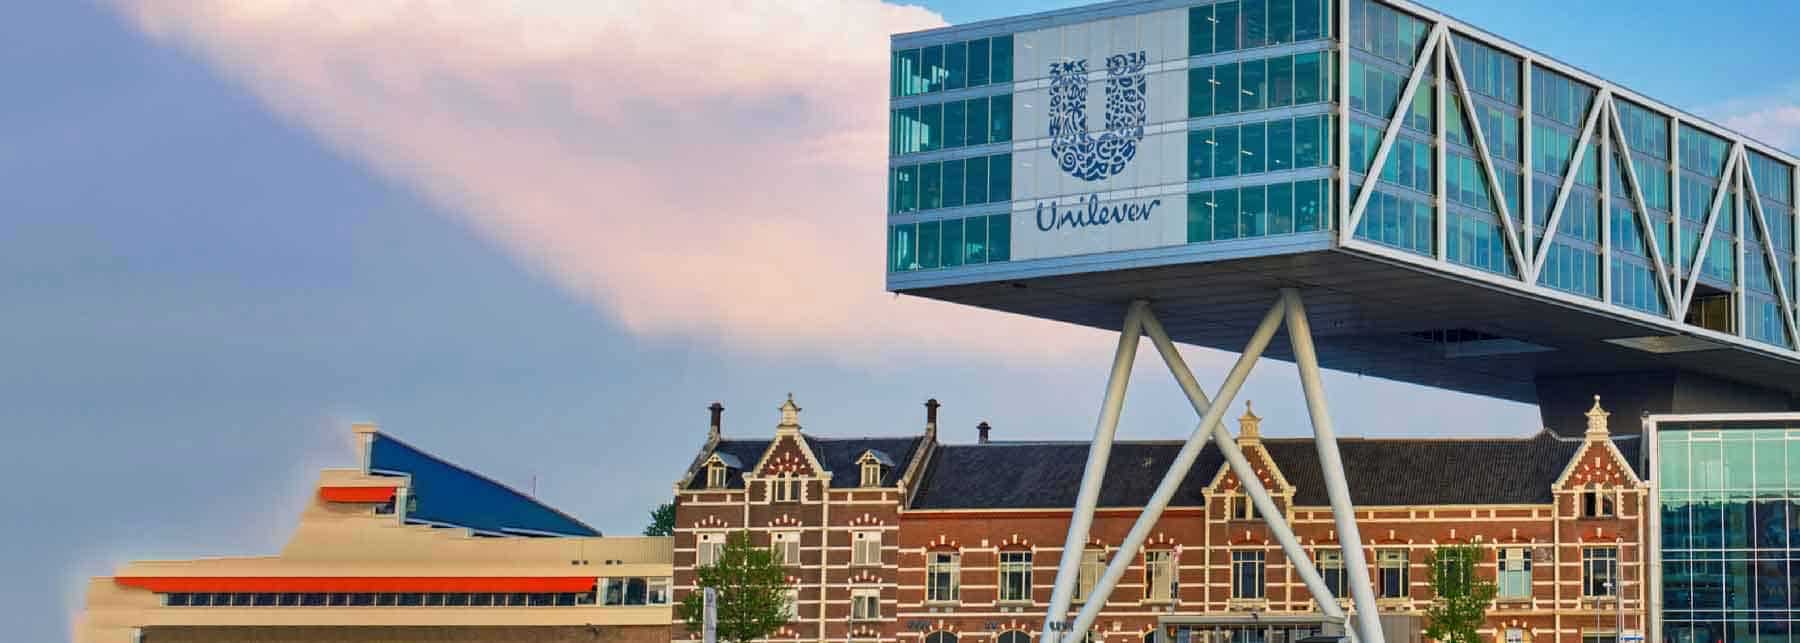 Unilever, the consumer goods giant, implements AI to retain, develop, and engage talent